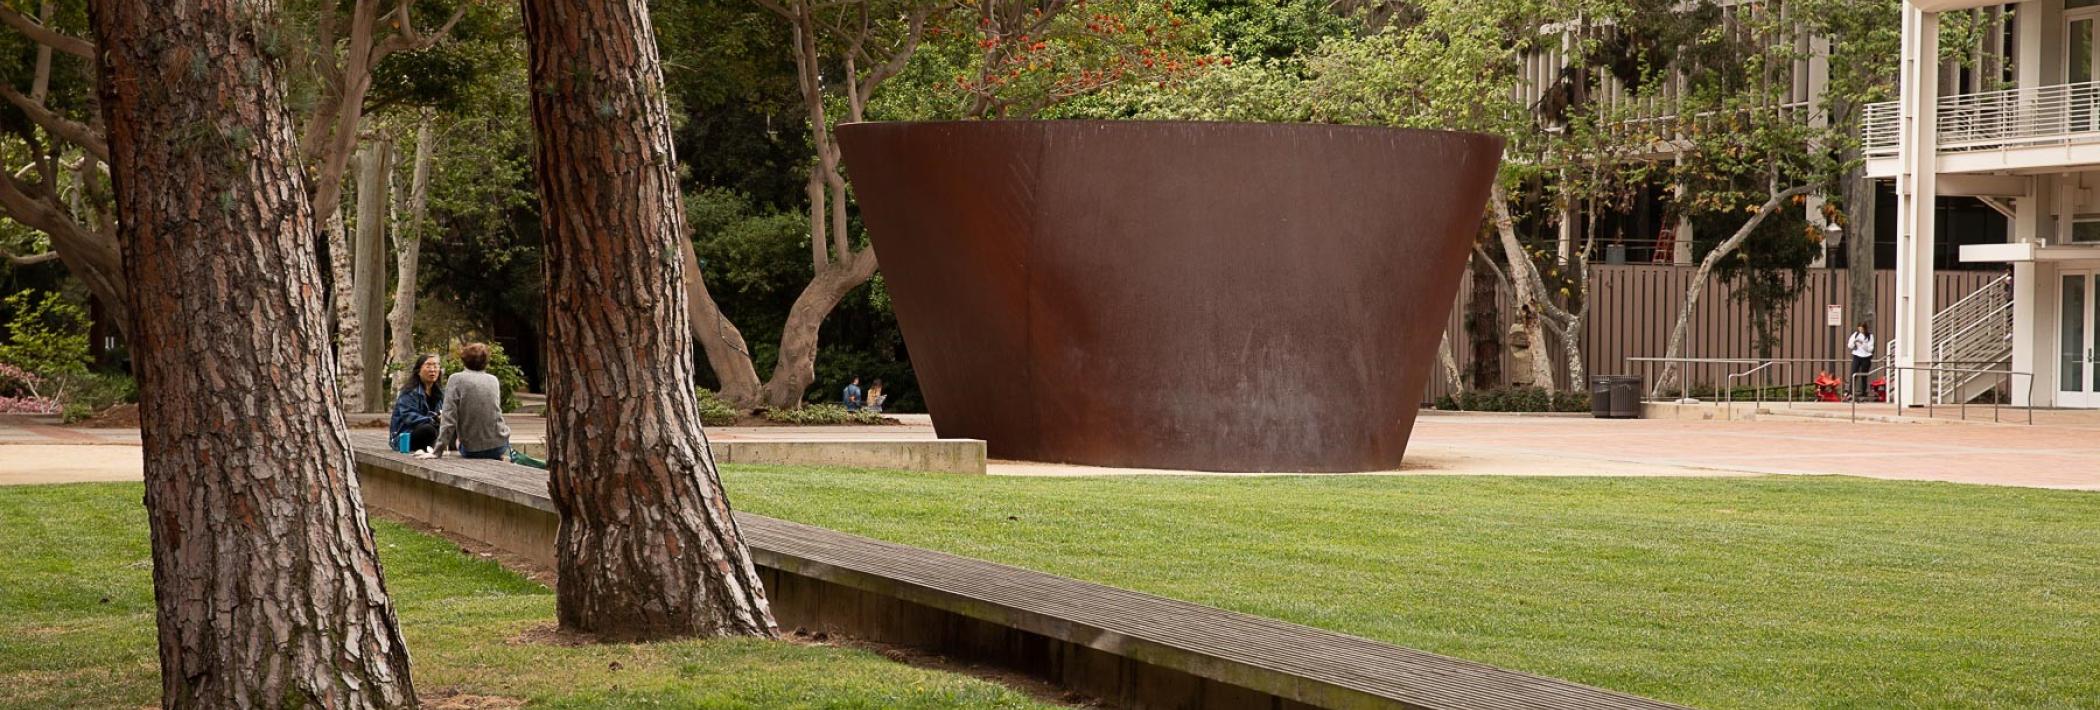 North Campus with lawn, trees, and a sculpture by Richard Serra